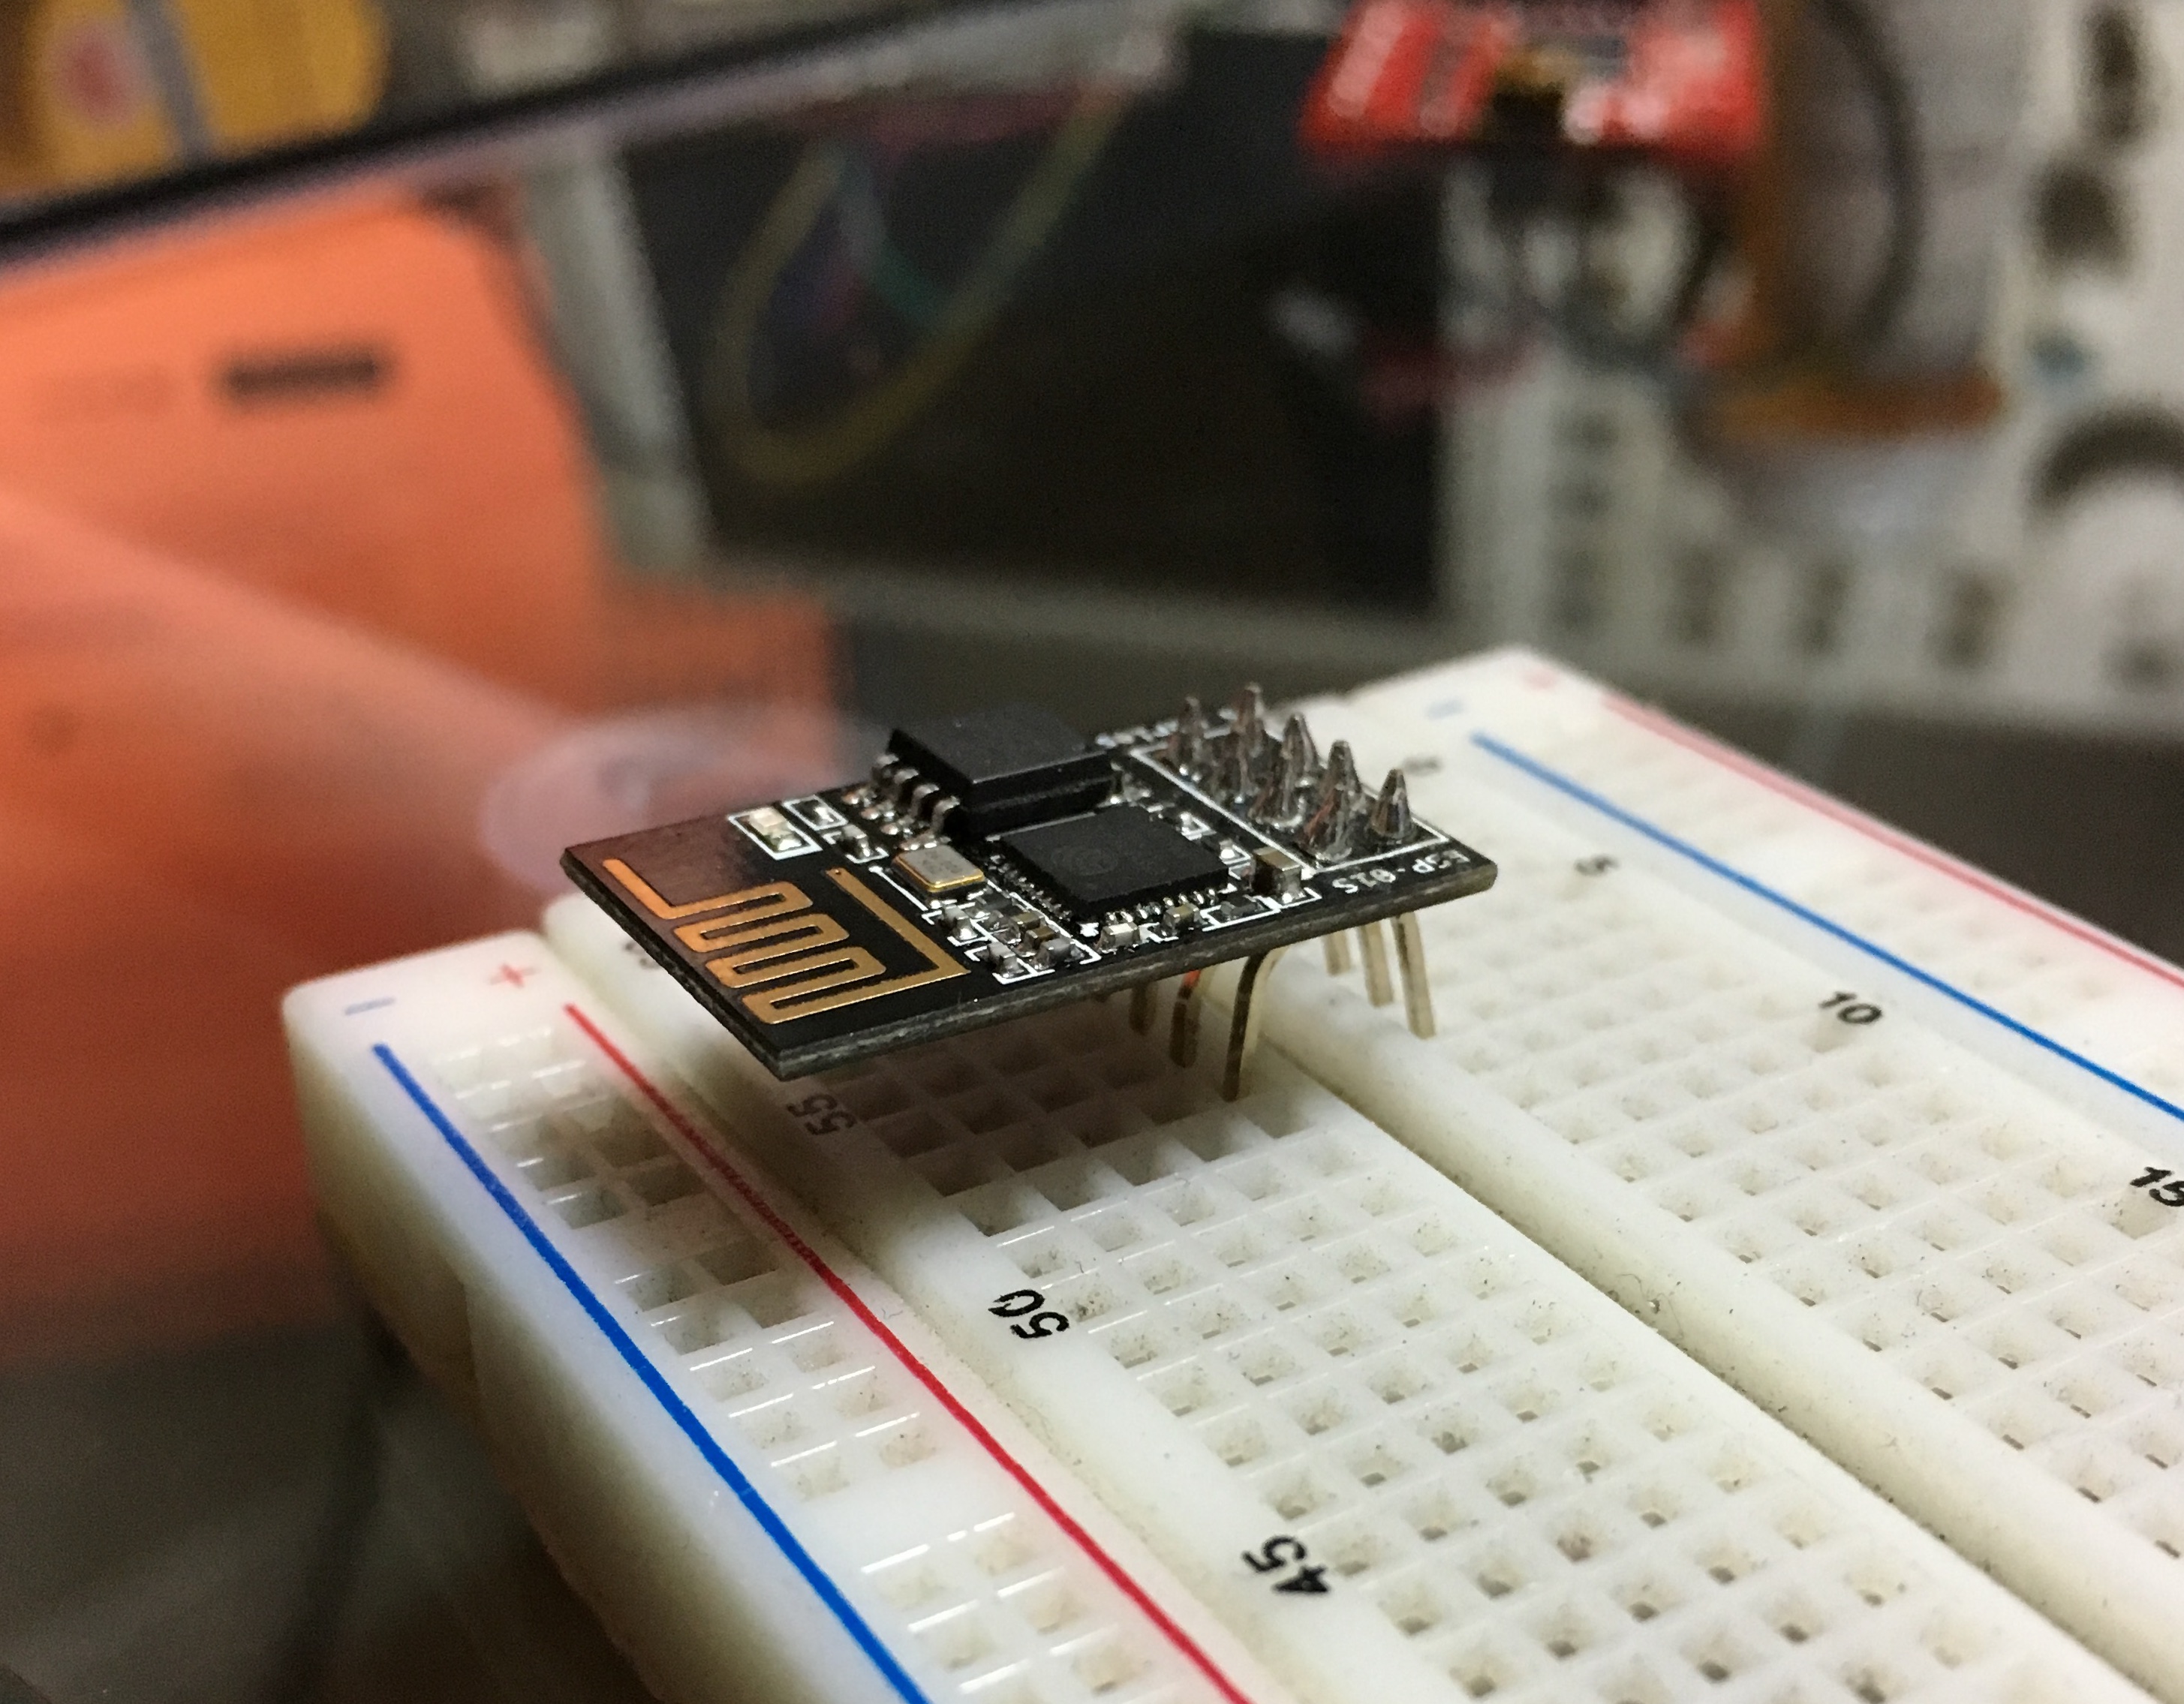 ESP8266 with bent headers on a breadboard